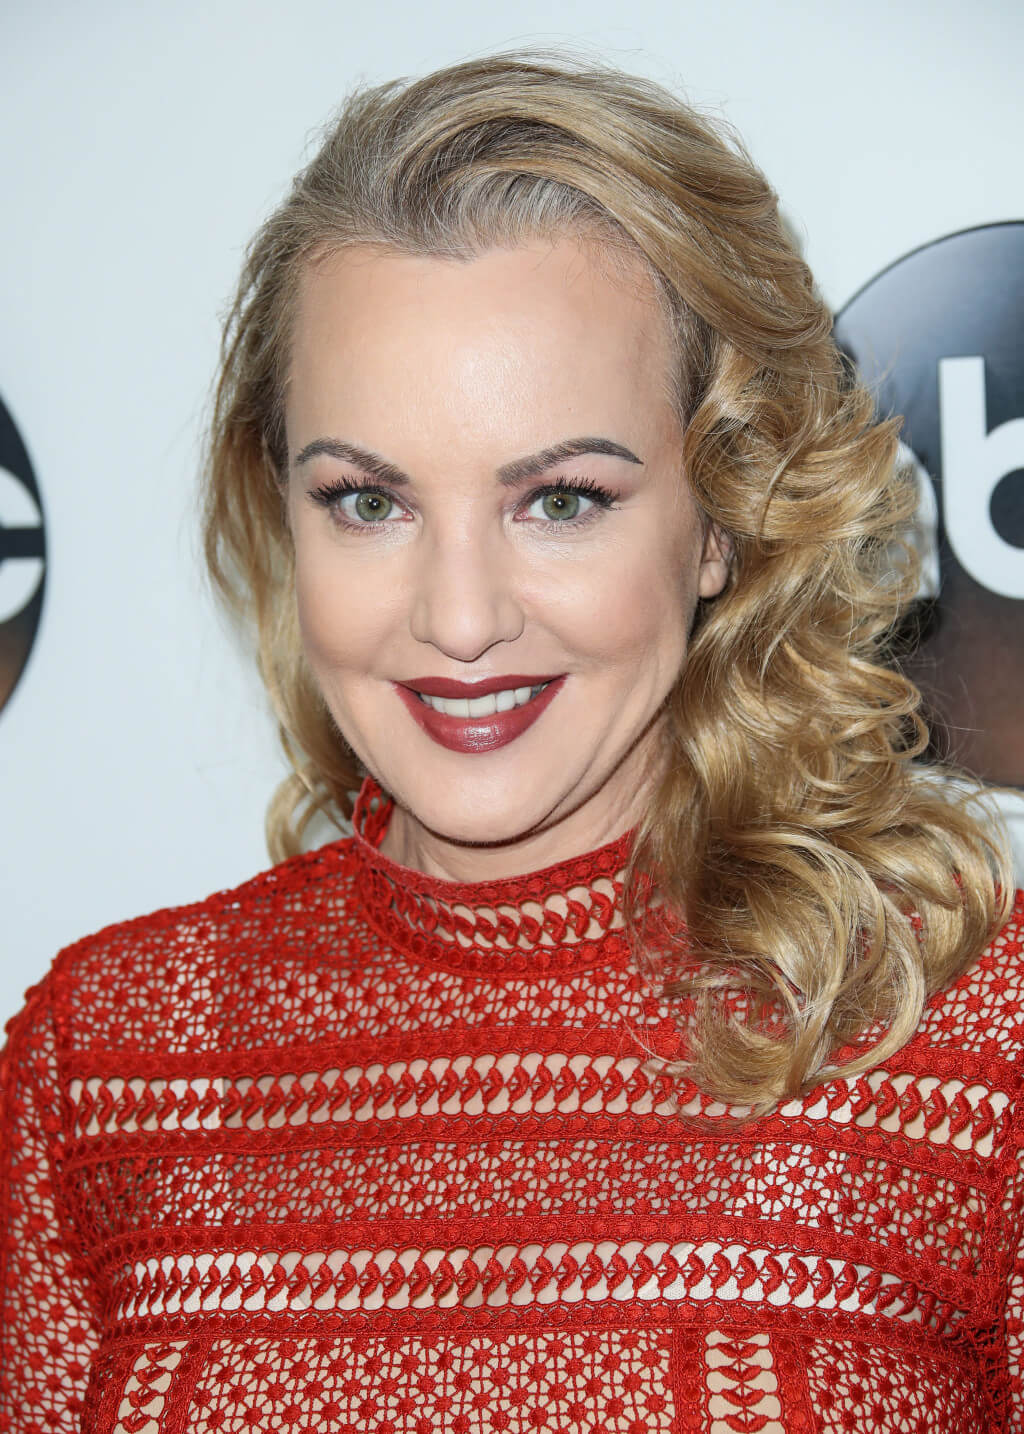 55 Hot And Sexy Pictures Of Wendi McLendon-Covey Is Going To Make Your Day A Win 298